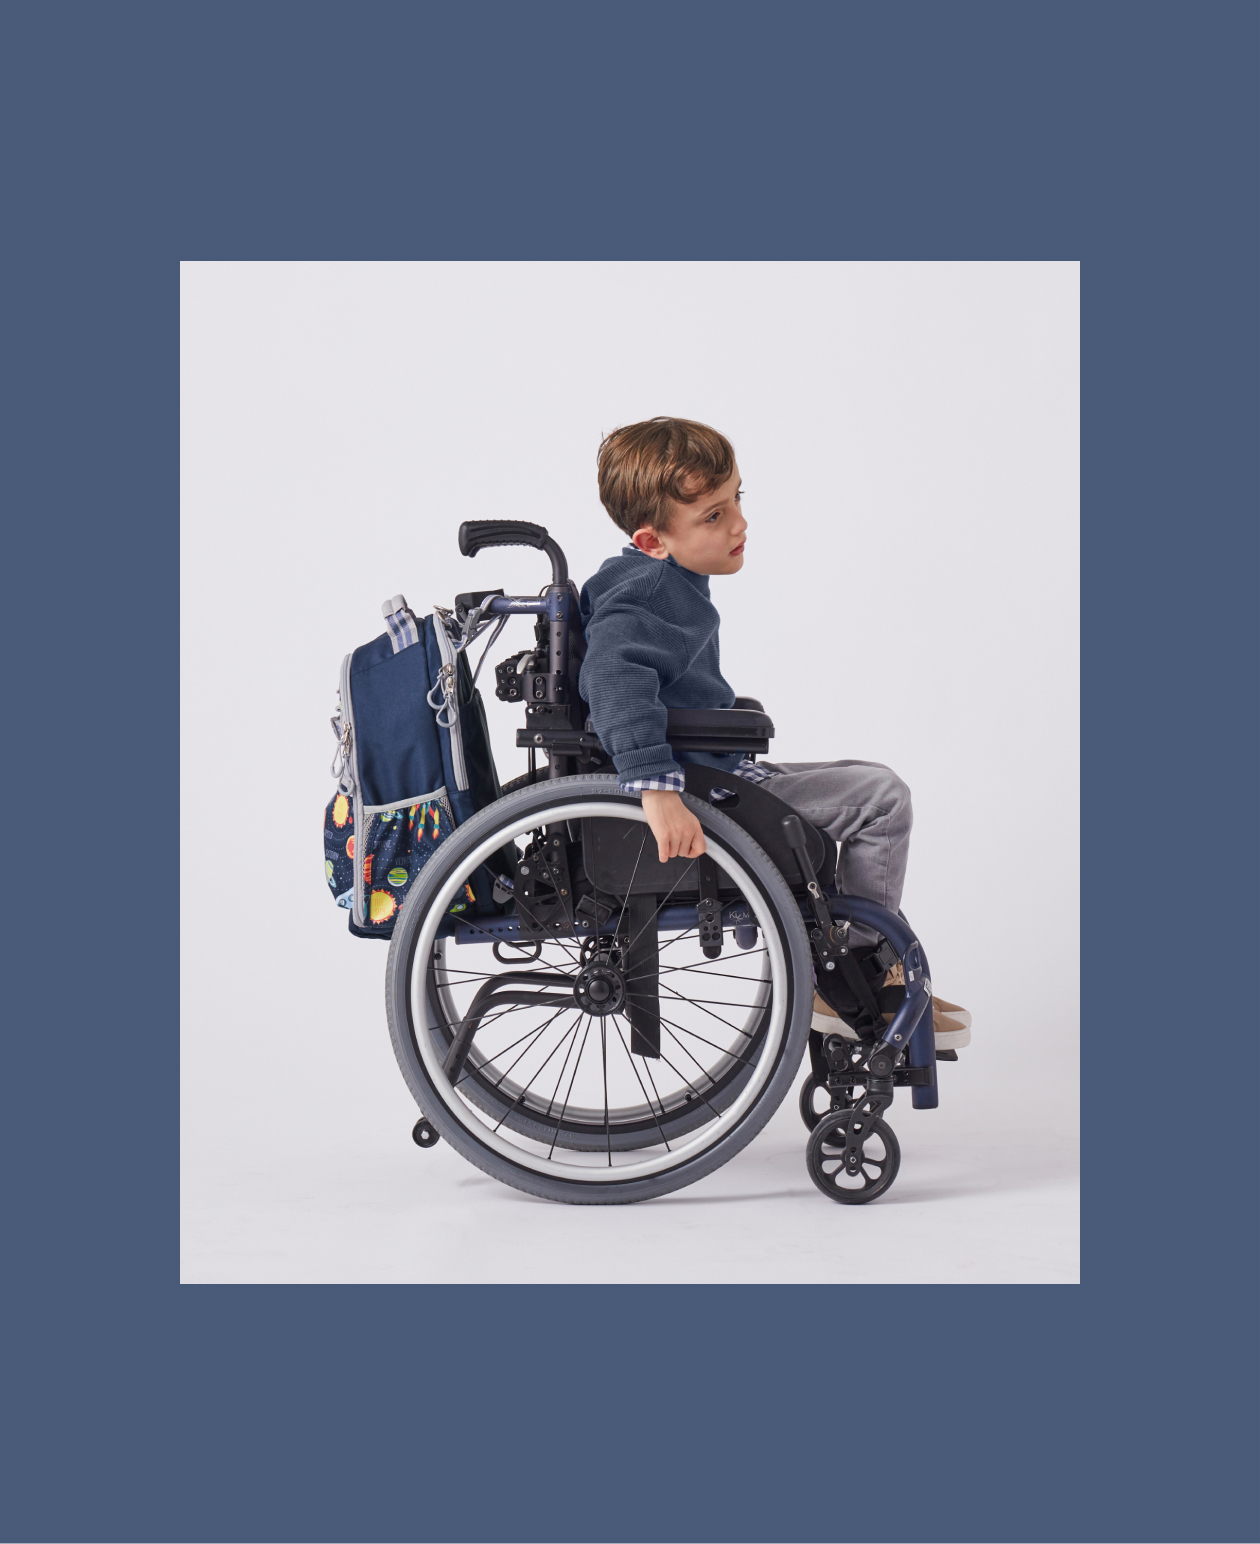 Image shows the side profile a young boy sitting in a wheelchair. Attached to the wheelchair is a Pottery Barn Kids Mackenzie Adaptive Backpack in Solar System print and embroidered with a name.